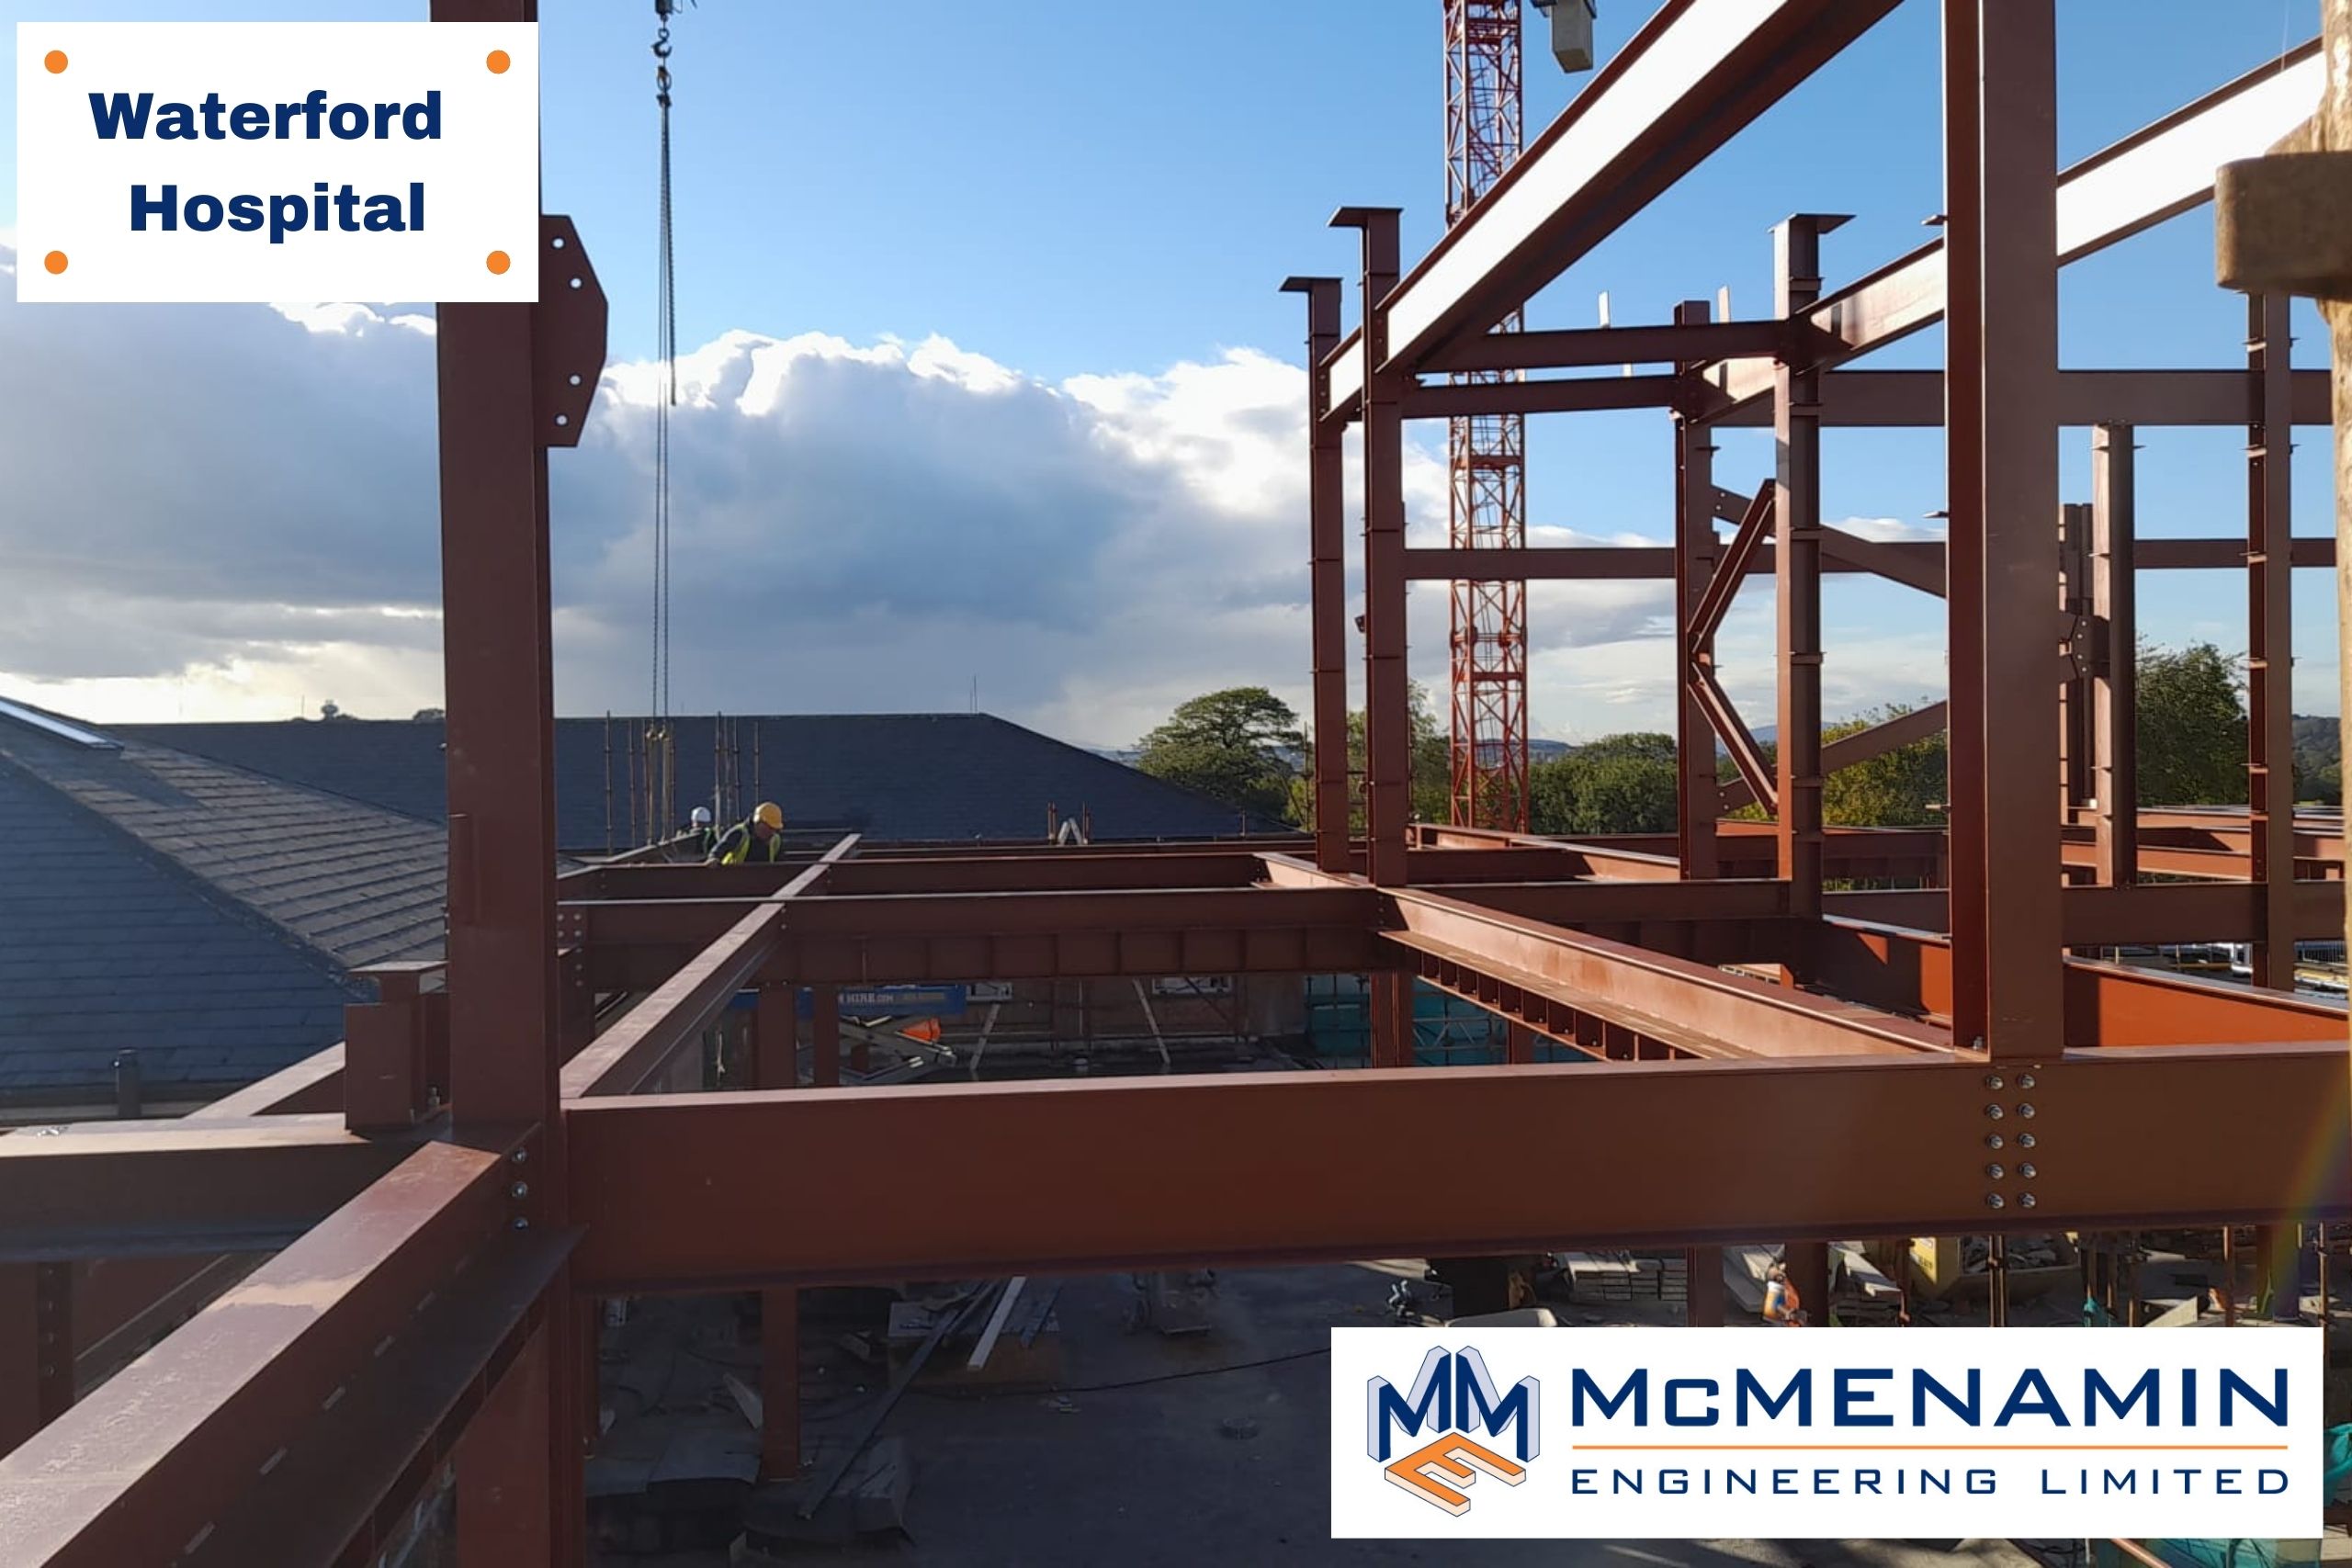 Photo shows structural steel & purlins supplied to the Cath Lab Waterford